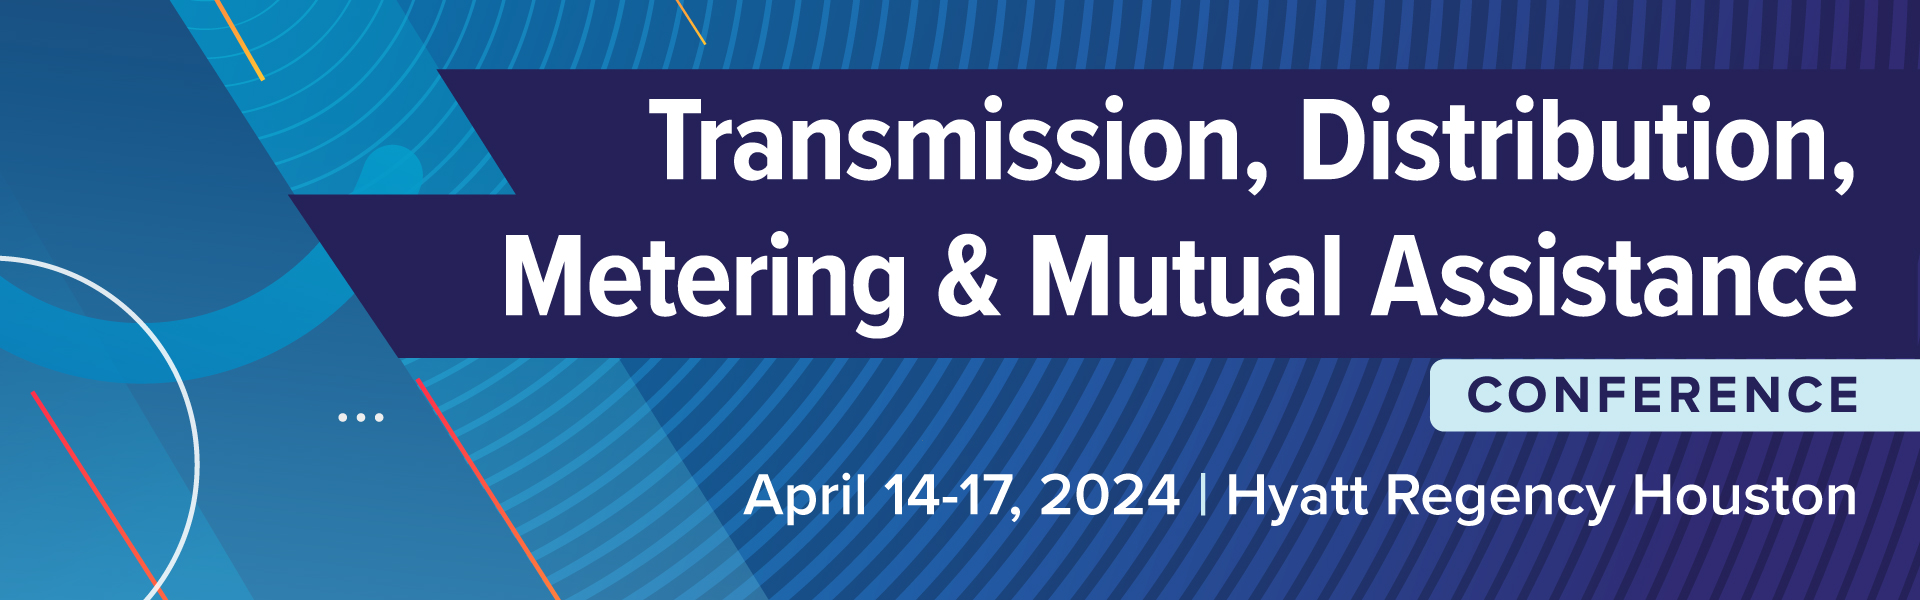 Transmission, Distribution, Metering & Mutual Assistance Conference